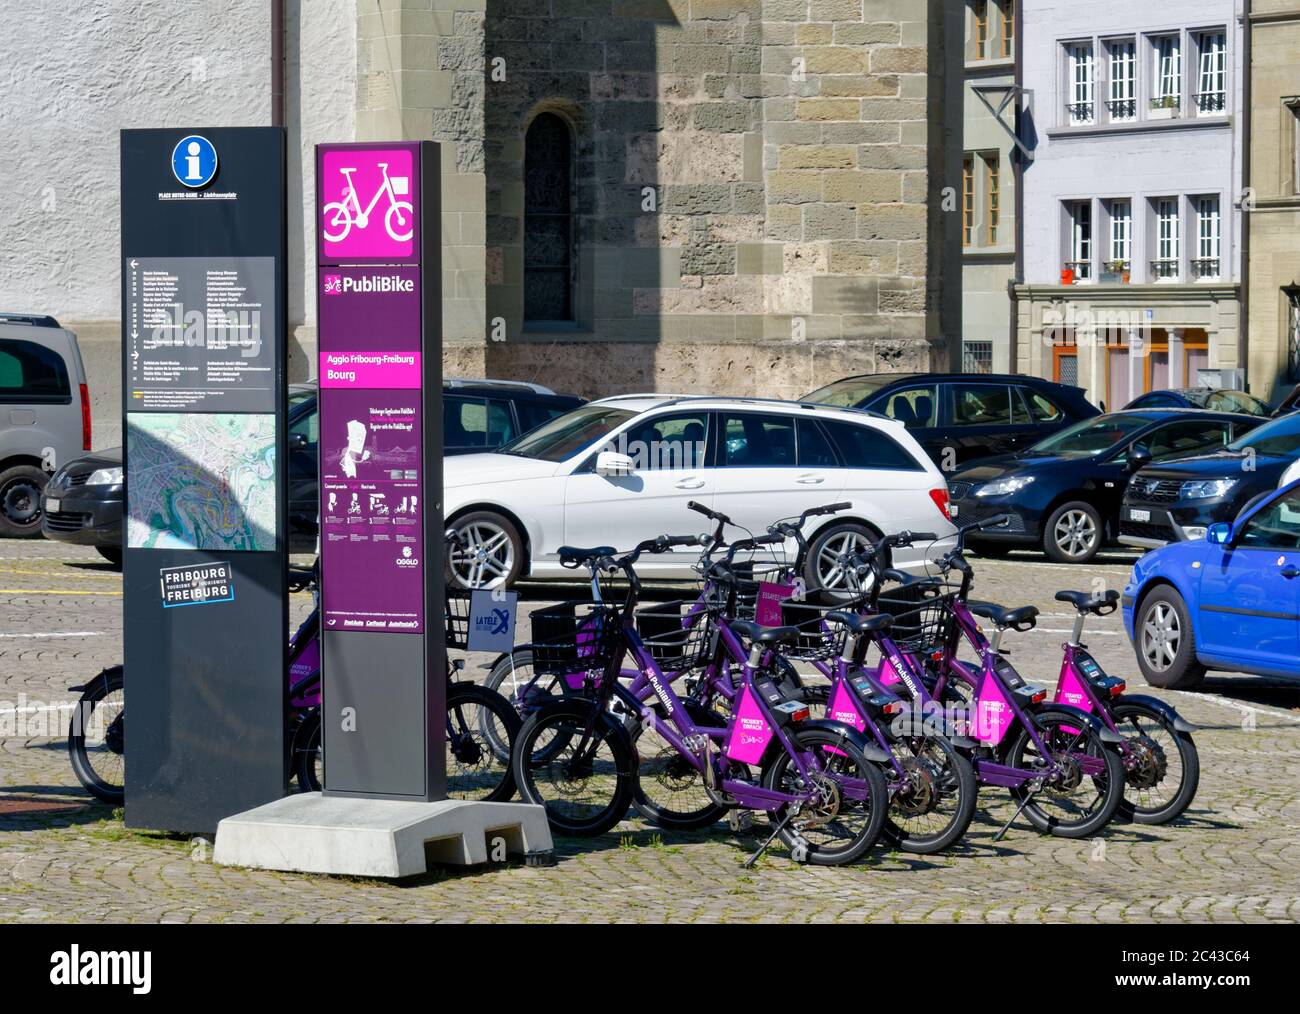 The PubliBike station, part of the Swiss bike-sharing system, is surrounded  by cars on a parking lot in center of Fribourg (Freiburg), Switzerland  Stock Photo - Alamy